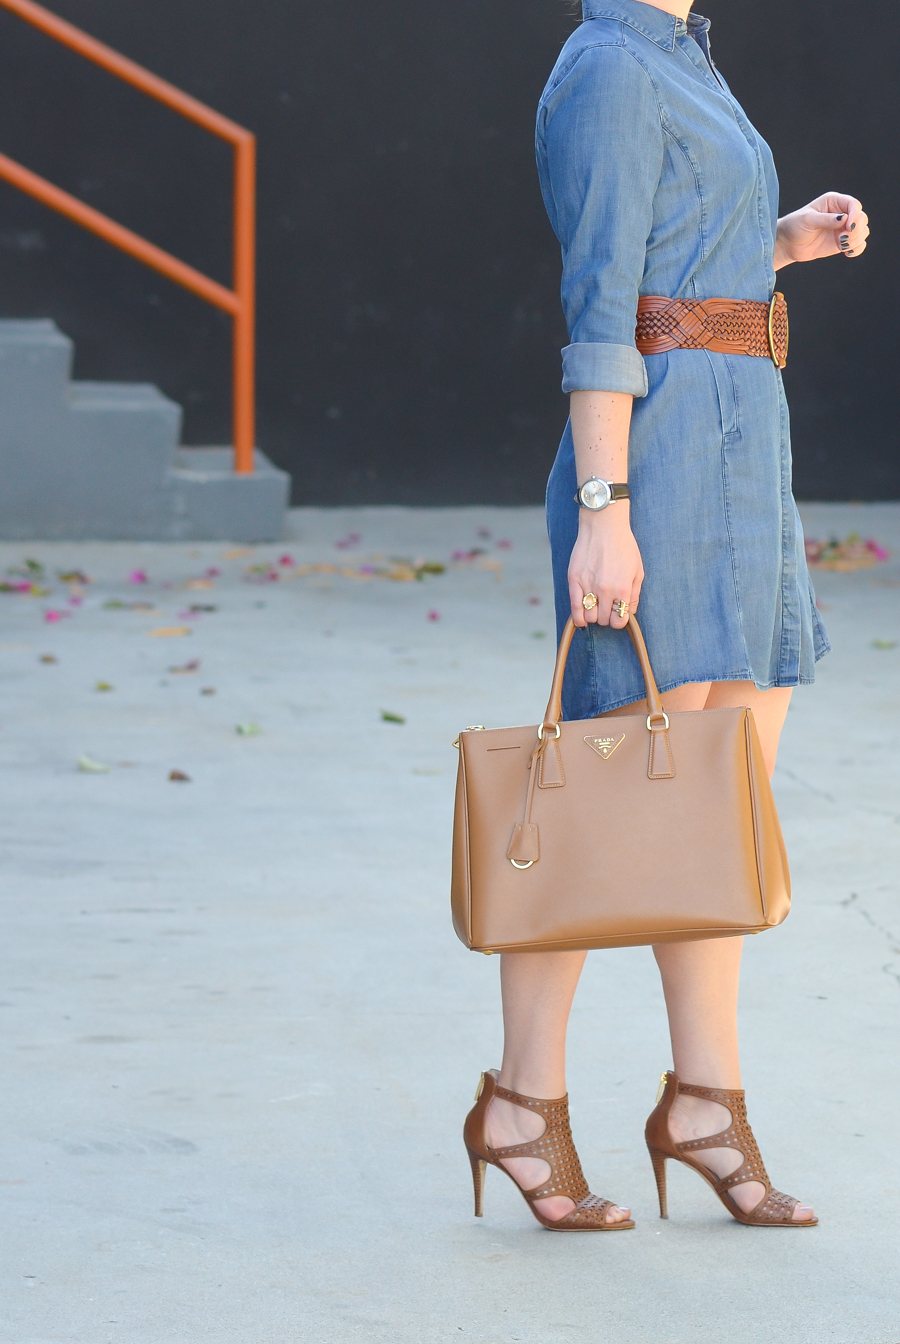 Learn What Shoes to Wear with Denim Dresses, to Style a Denim Dress! | Denim  shirt dress outfit, Denim dress outfit fall, Denim dress outfit